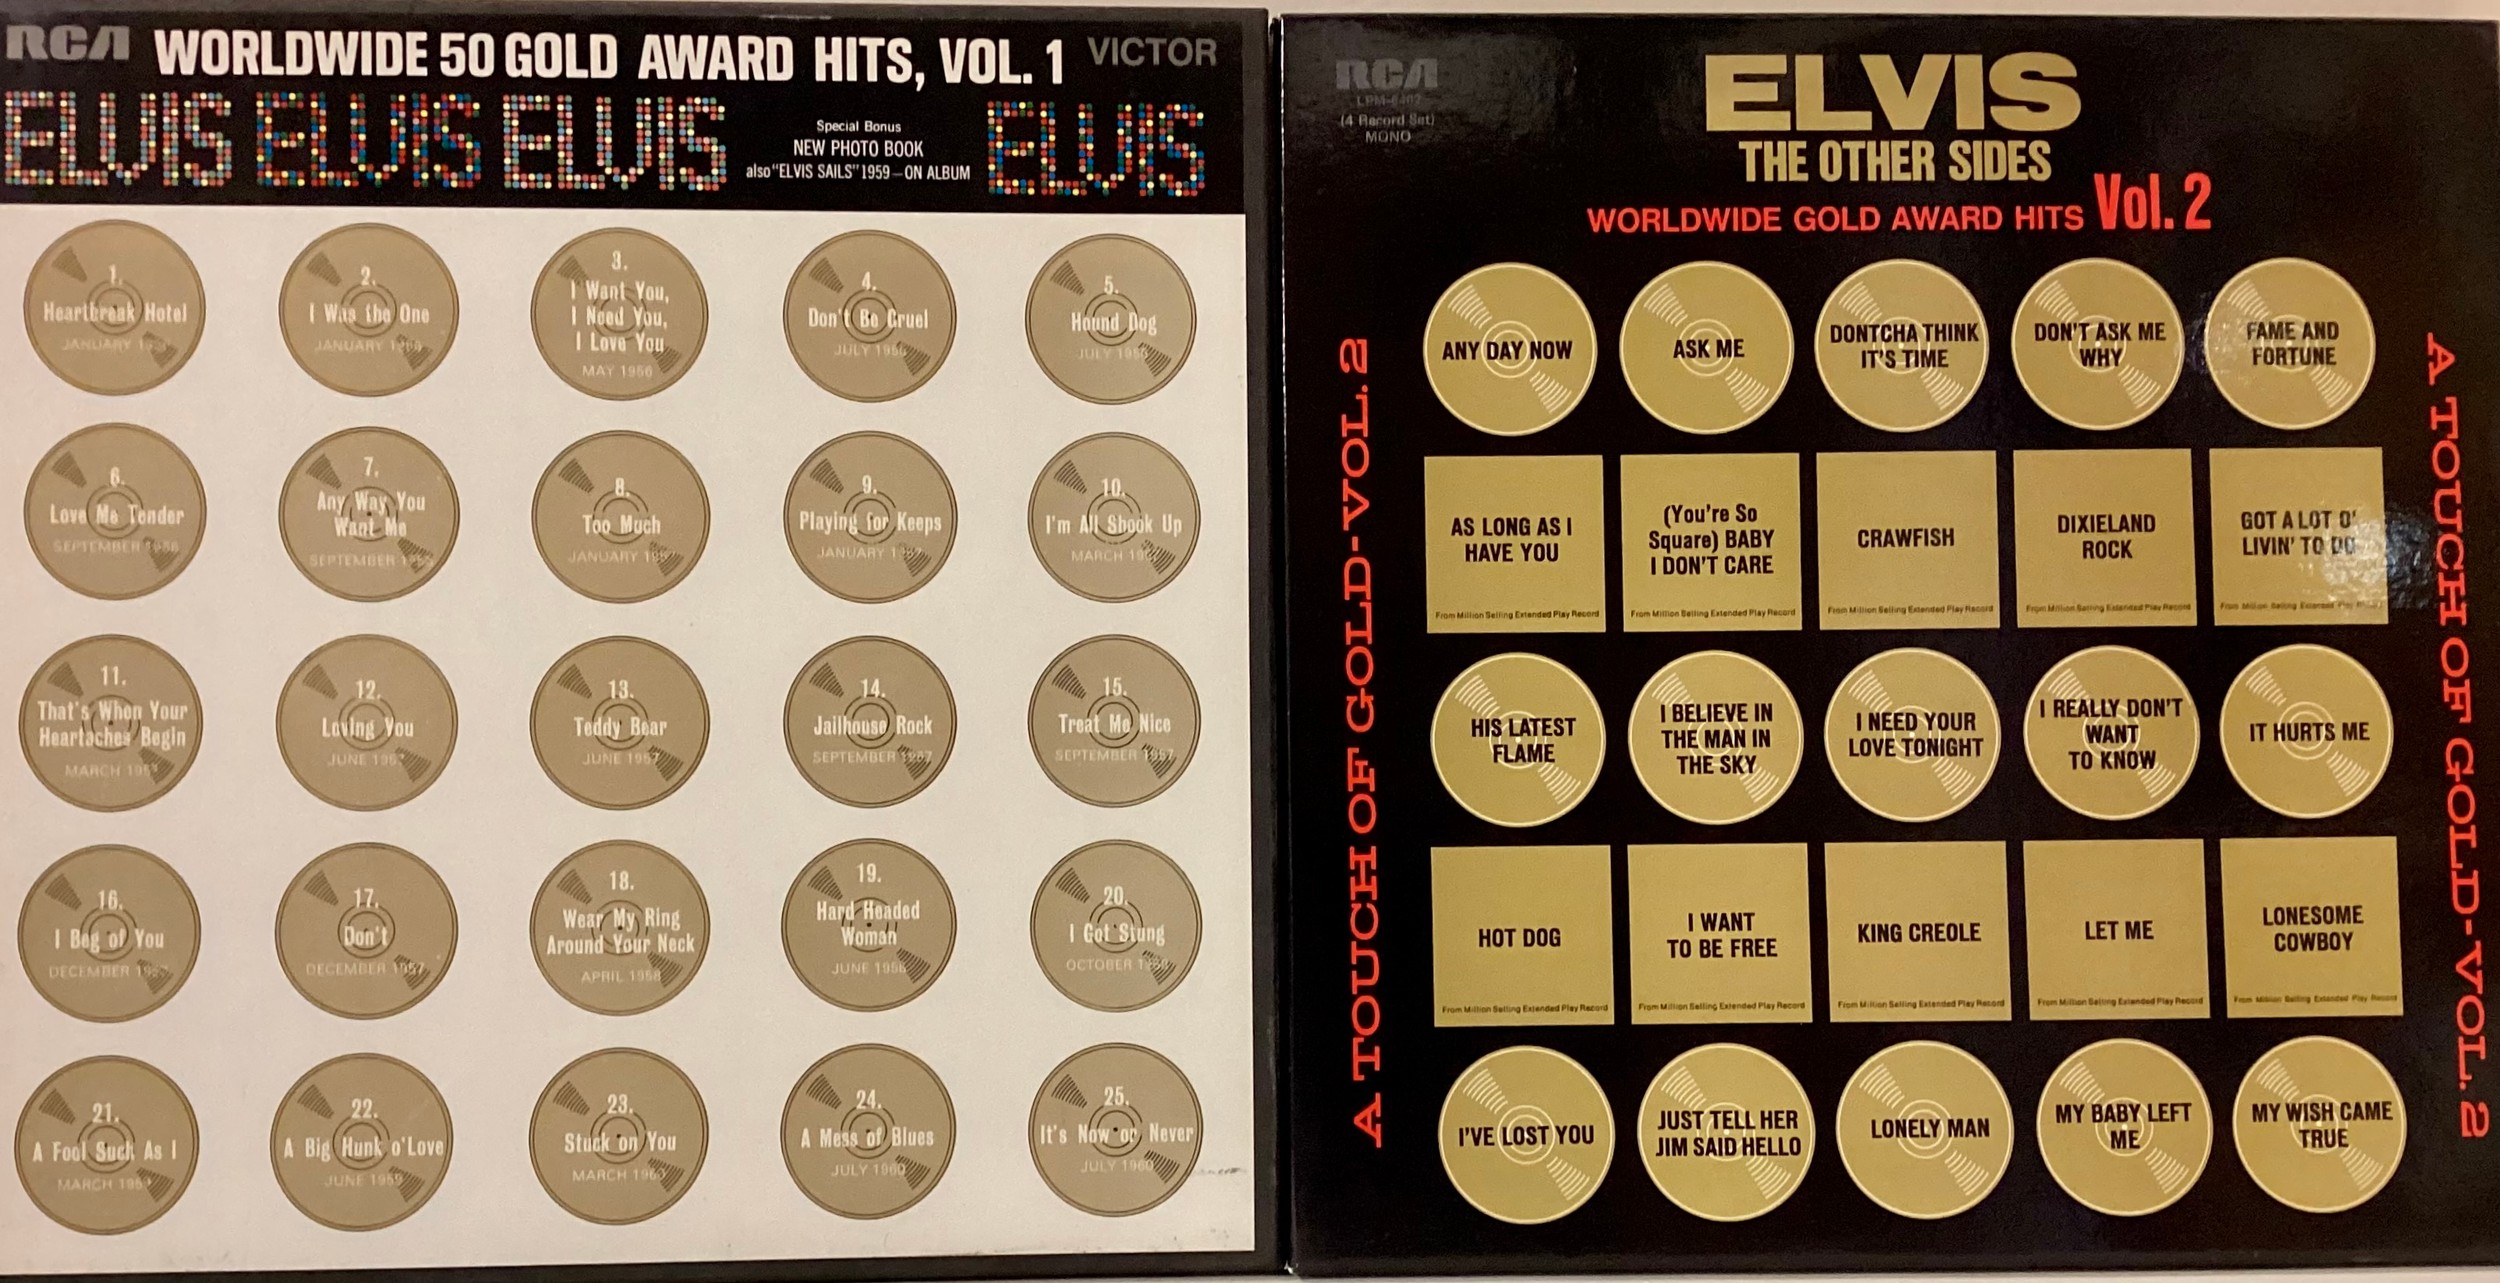 ELVIS PRESLEY RCA BOX SETS OF VINYL RECORDS X 2. Here we have volume 1 & 2 of the ‘Worldwide Gold